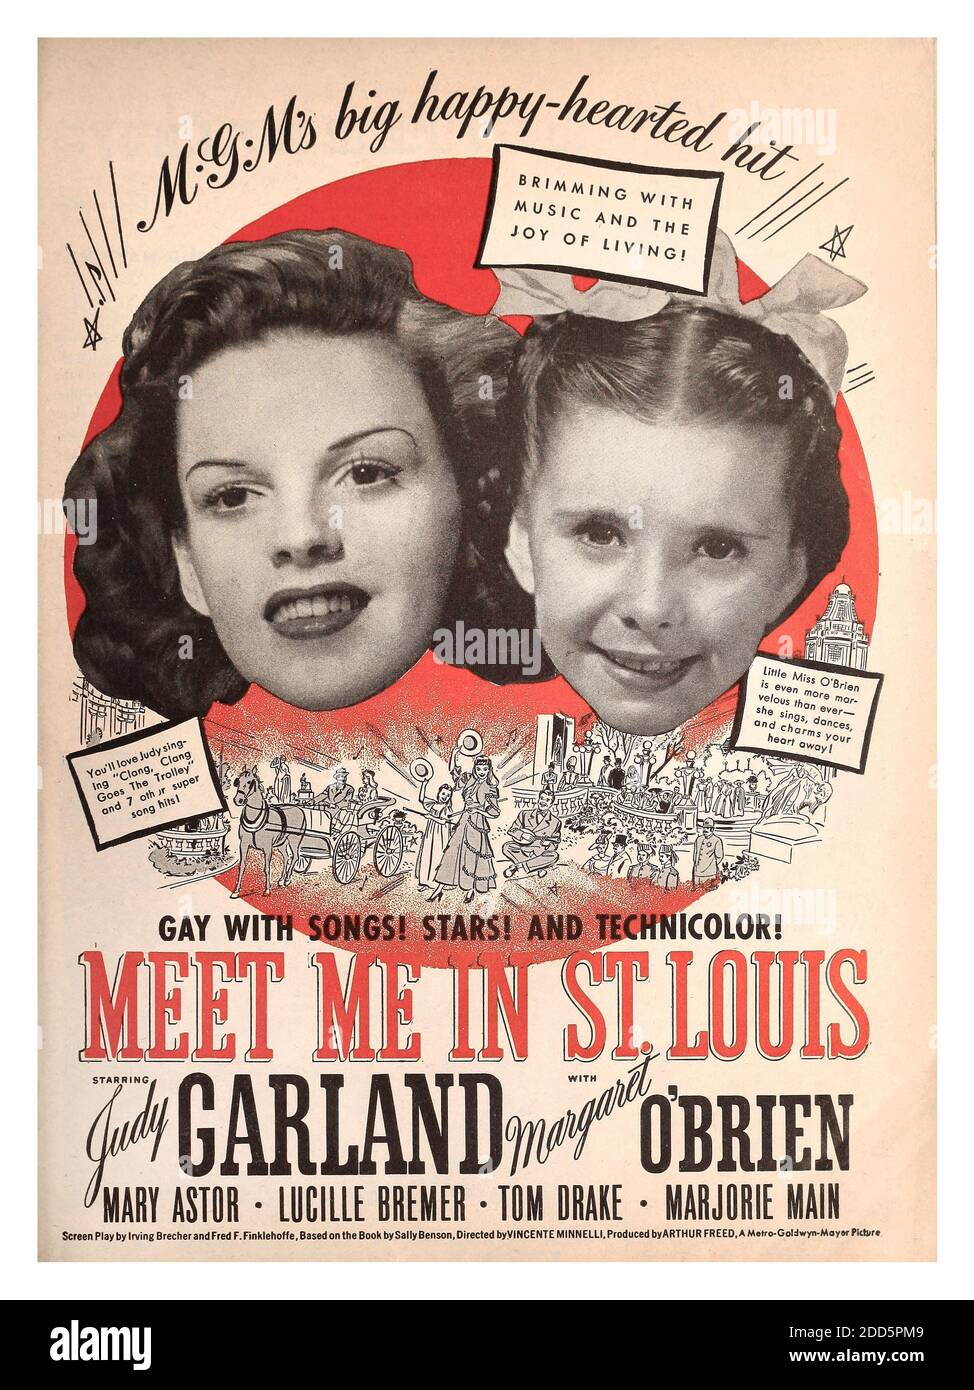 1940's Vintage Film Movie poster 'MEET ME IN ST.LOUIS' starring Judy Garland and Margaret O'Brien in 'Meet Me in St. Louis' 1944. also appearing Mary Astor, Lucille Bremer, Tom Drake, Marjorie Main, Directed by Vincente Minnelli an MGM Picture Stock Photo